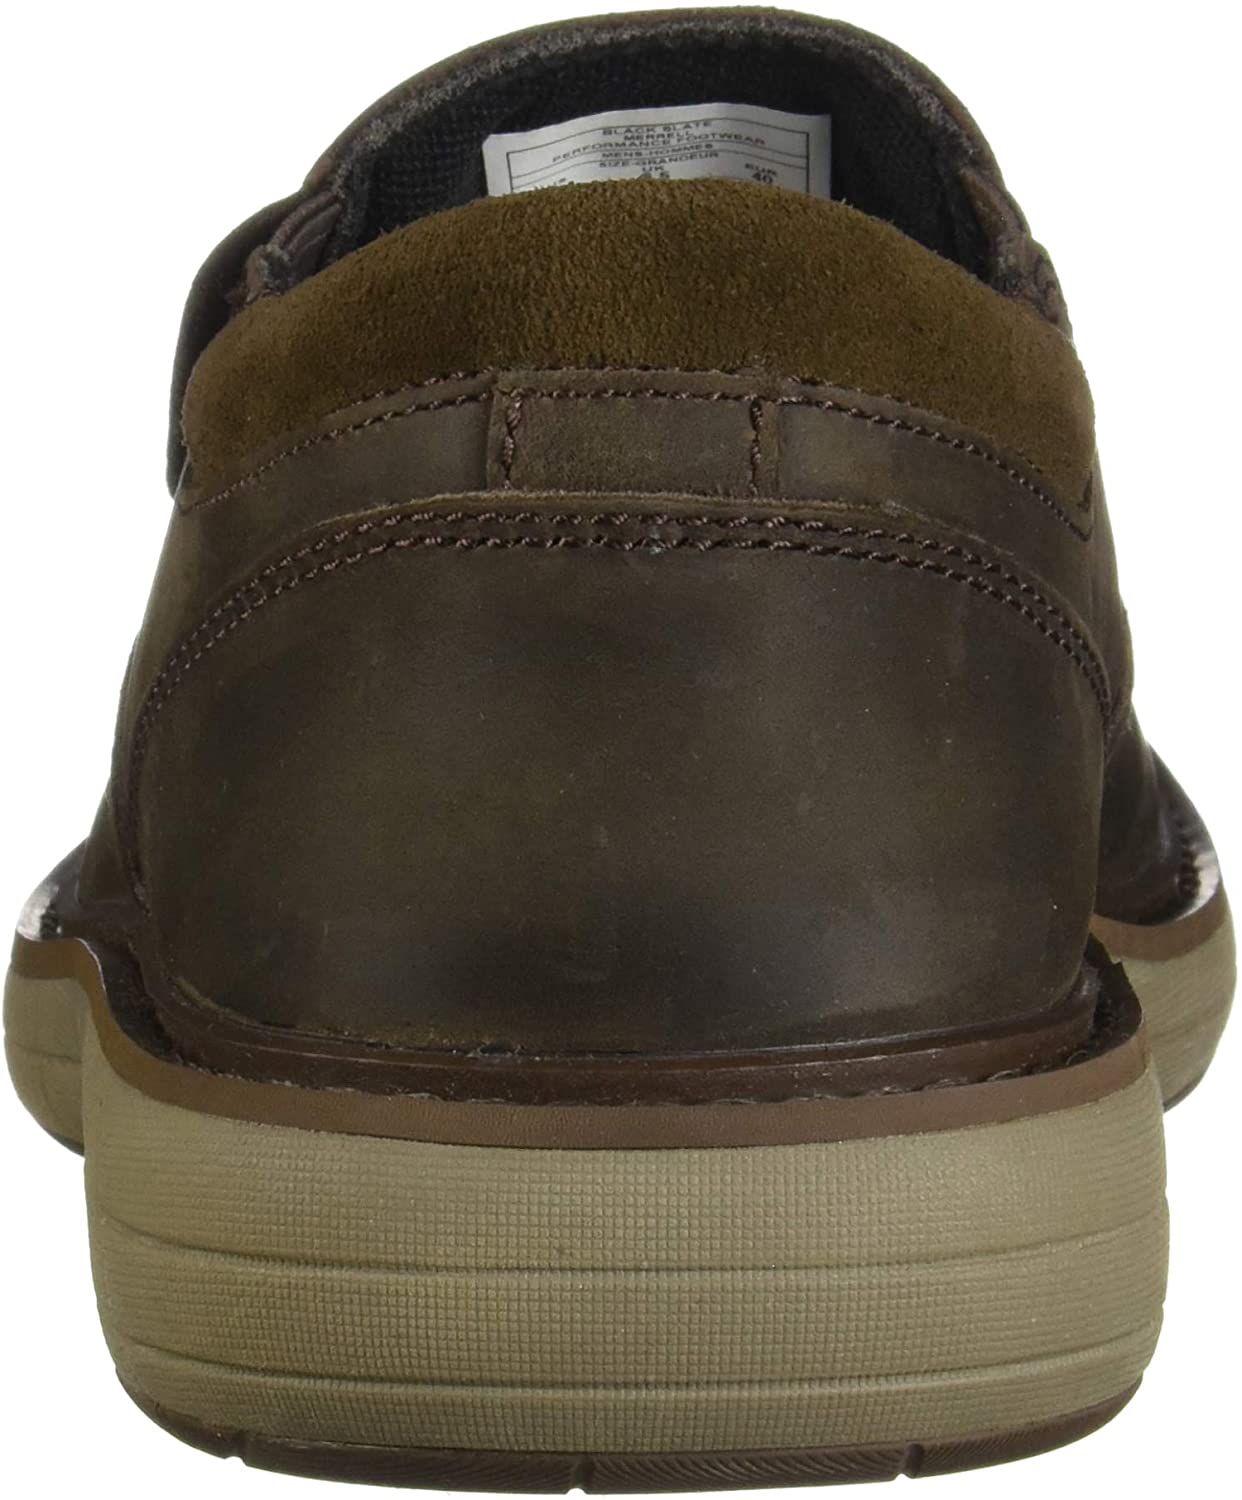 merrell men's world vue moc casual shoes - image 3 of 8